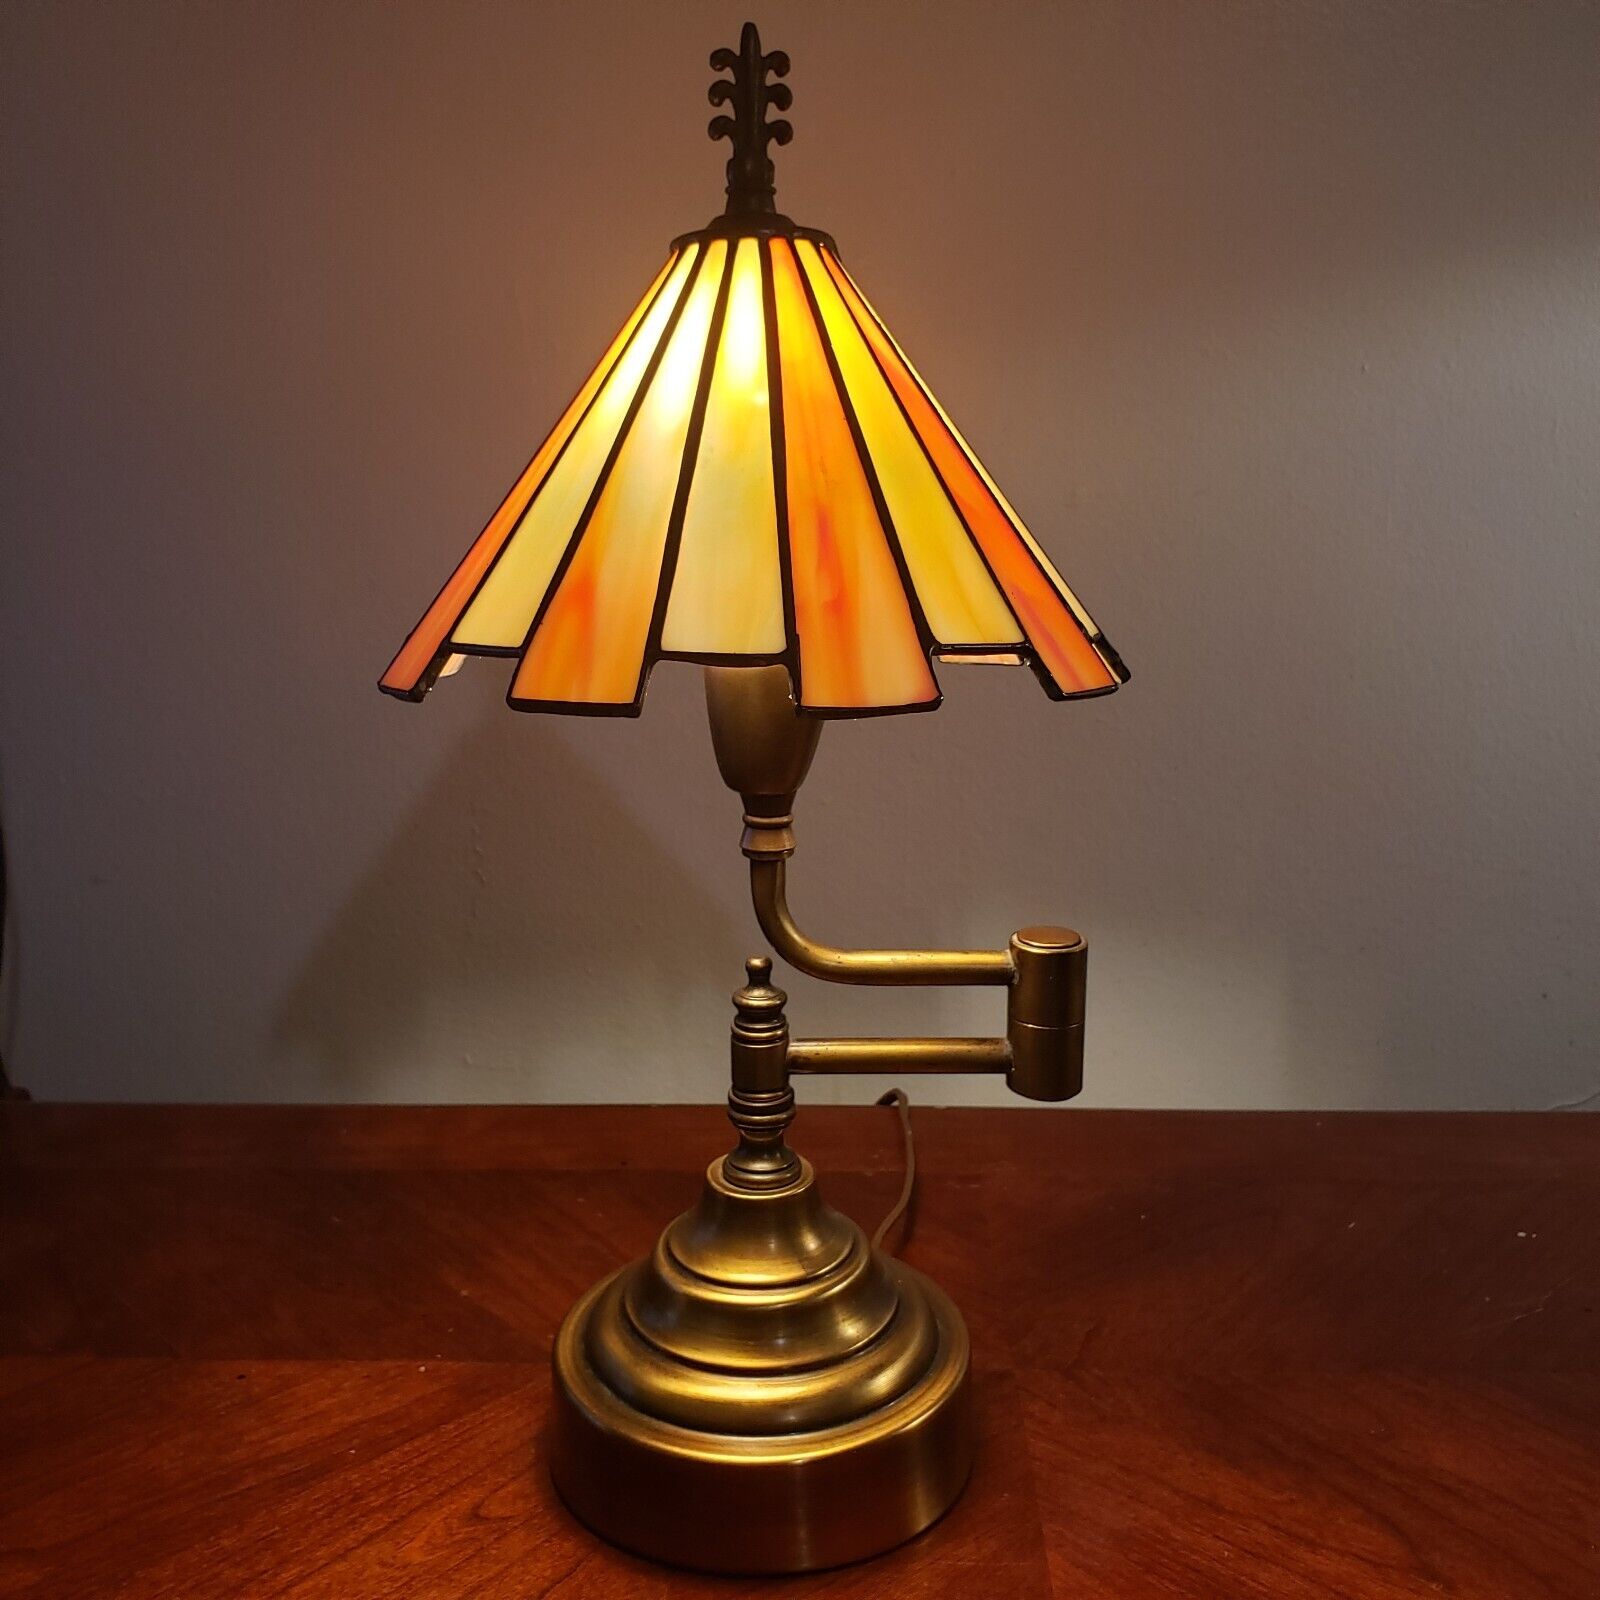 Vintage Mid-Century Tiffany-Style Stained Glass & Brass Swing Arm Desk Lamp